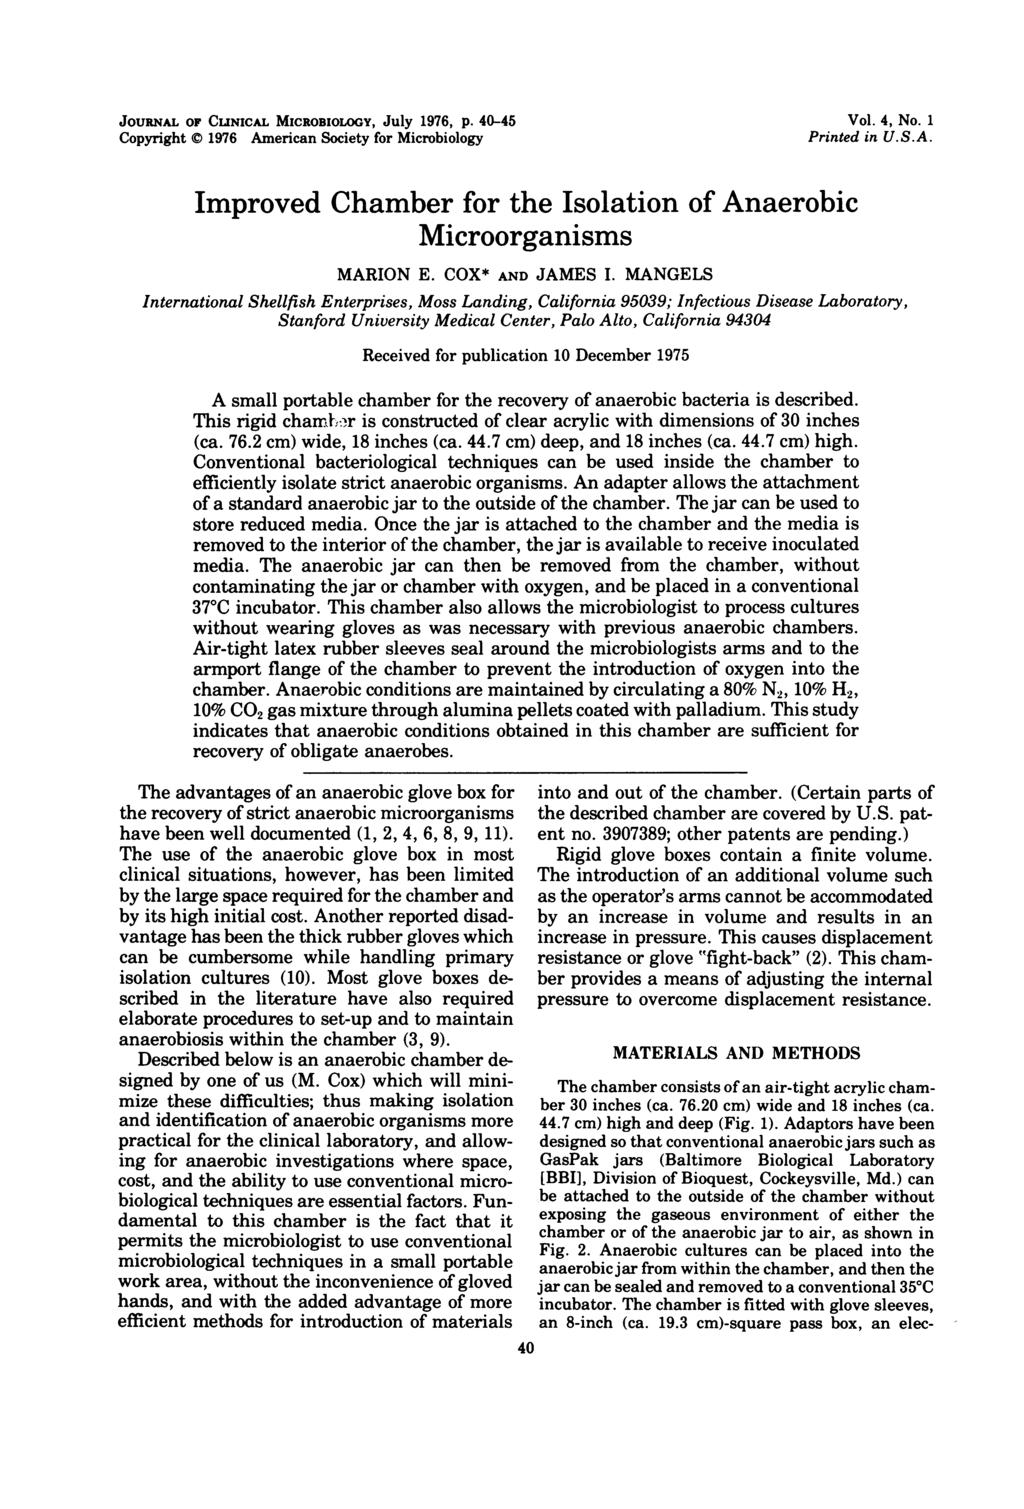 JOUNAL OF CLINICAL MICROBIOLOGY, July 1976, p. 40-45 Copyright ) 1976 American Society for Microbiology Vol. 4, No. 1 Printed in U.S.A. Improved Chamber for the Isolation of Anaerobic Microorganisms MARION E.